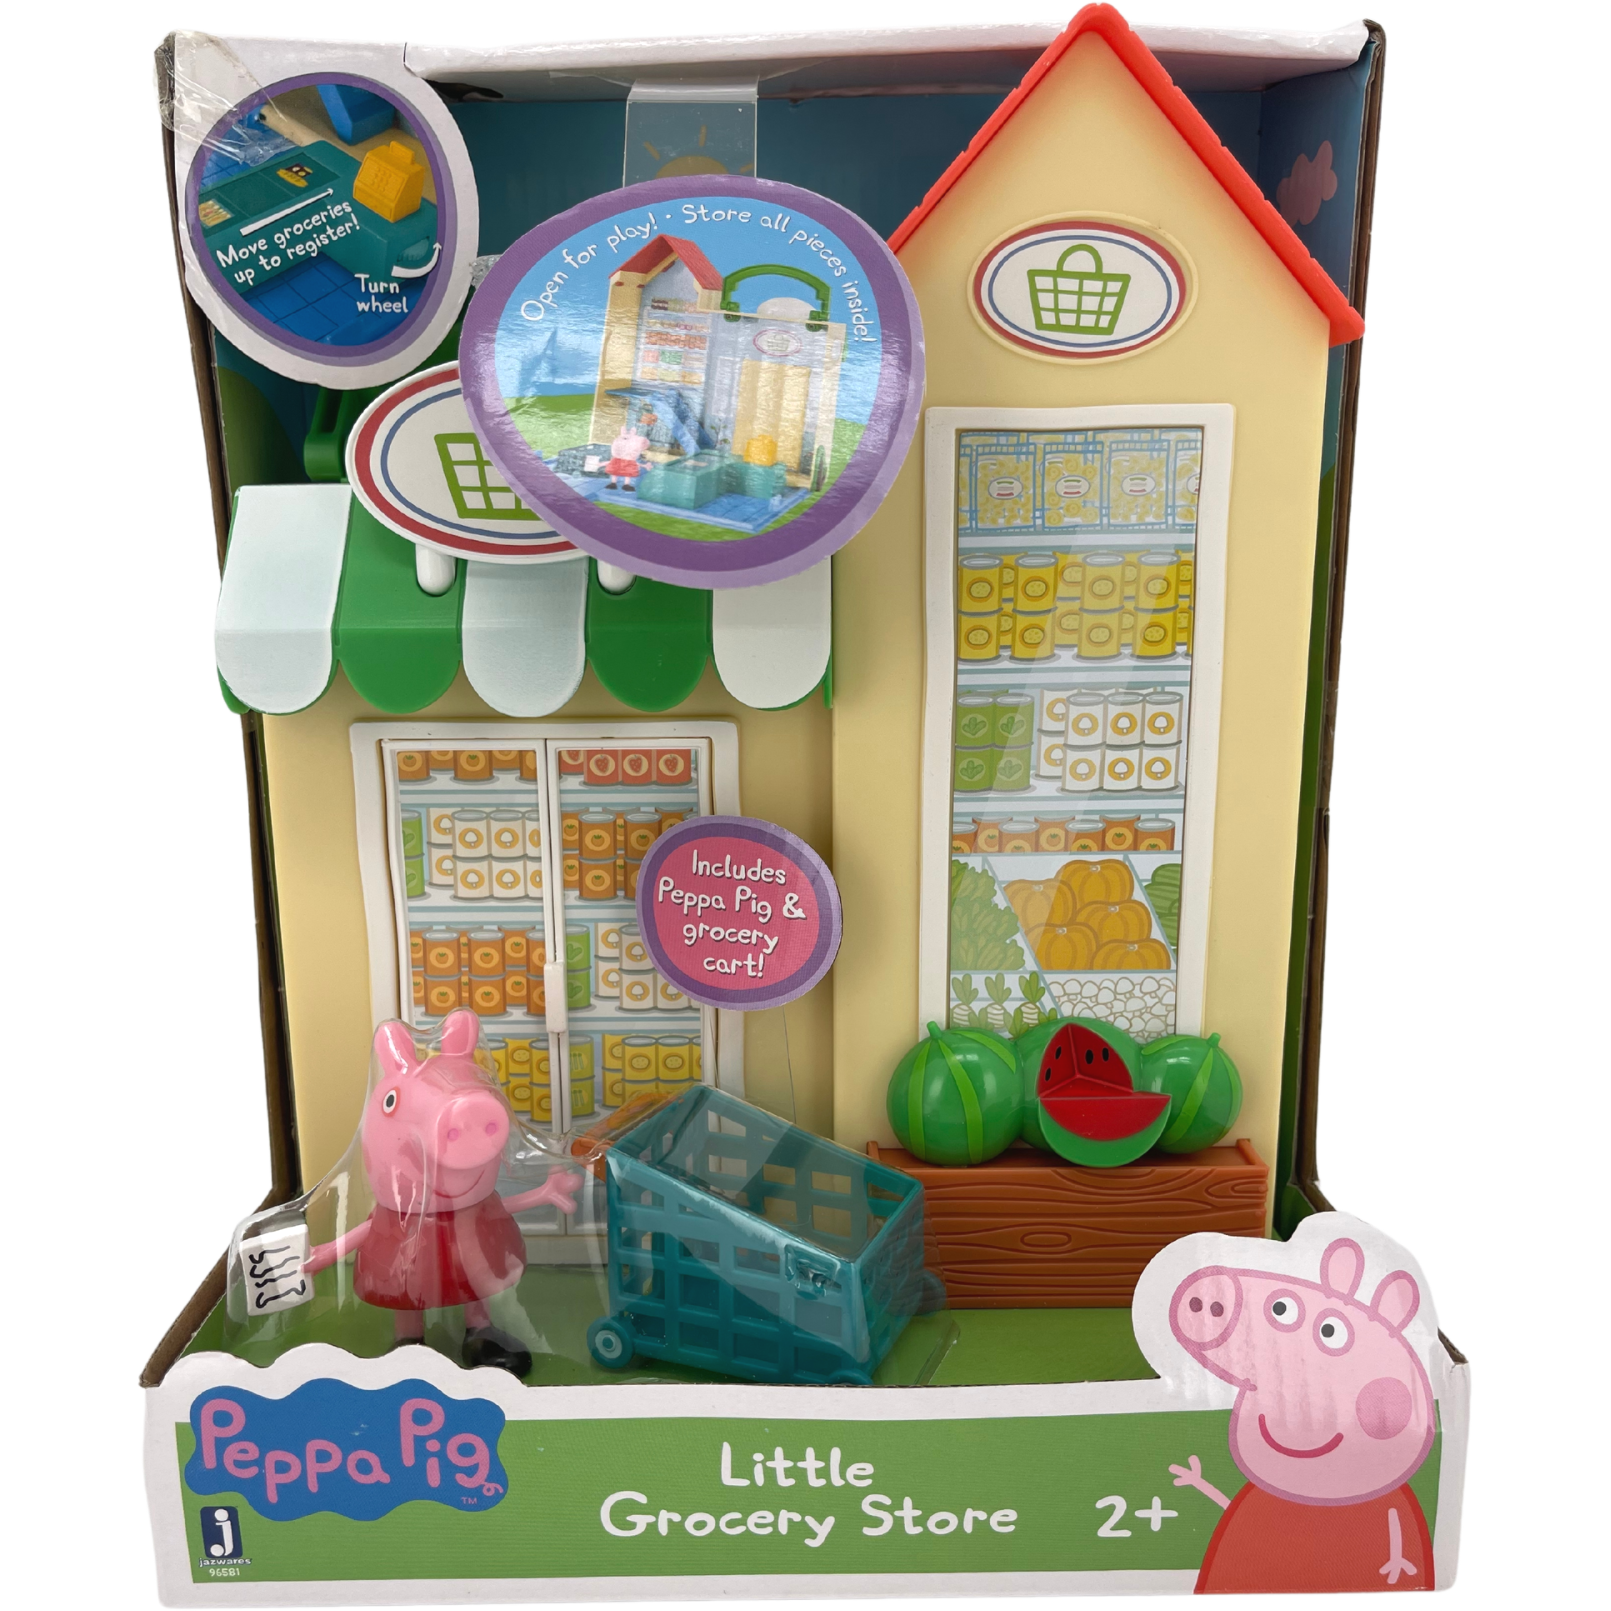 Peppa Pig Little Grocery Store Play Set / Peppa Pig Figure Included